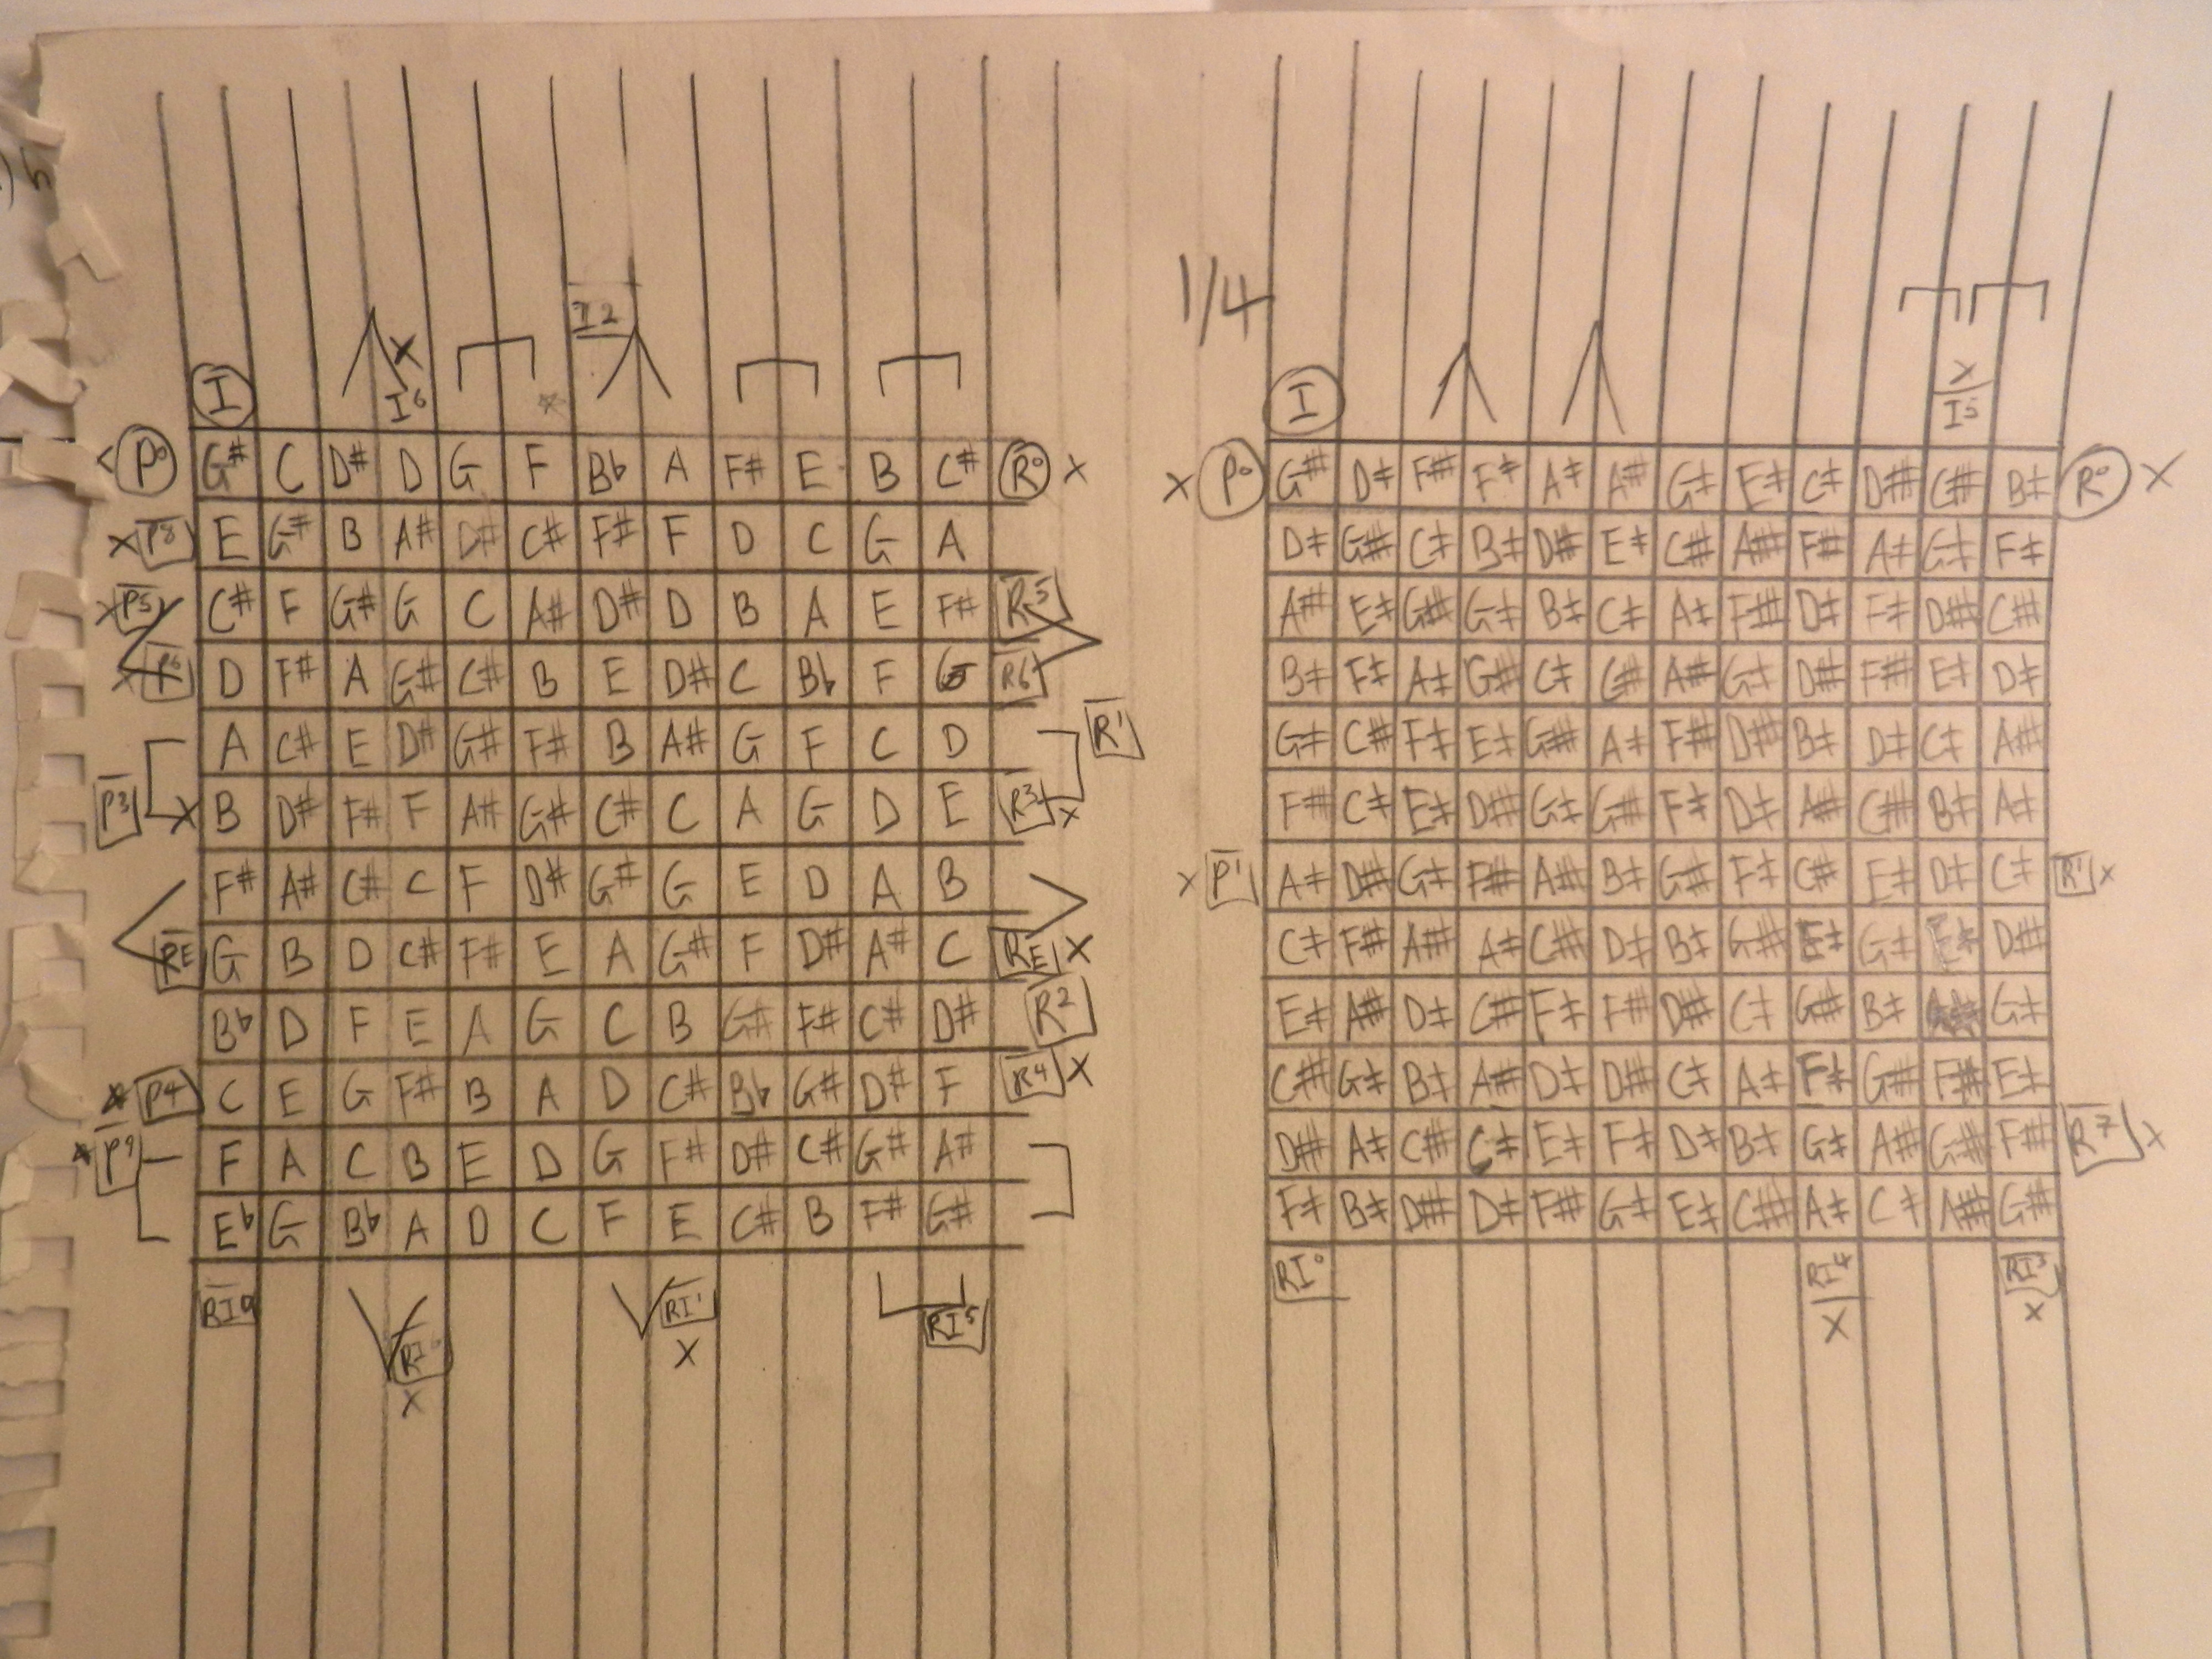 2012-doublethink-sketches-two-matrices